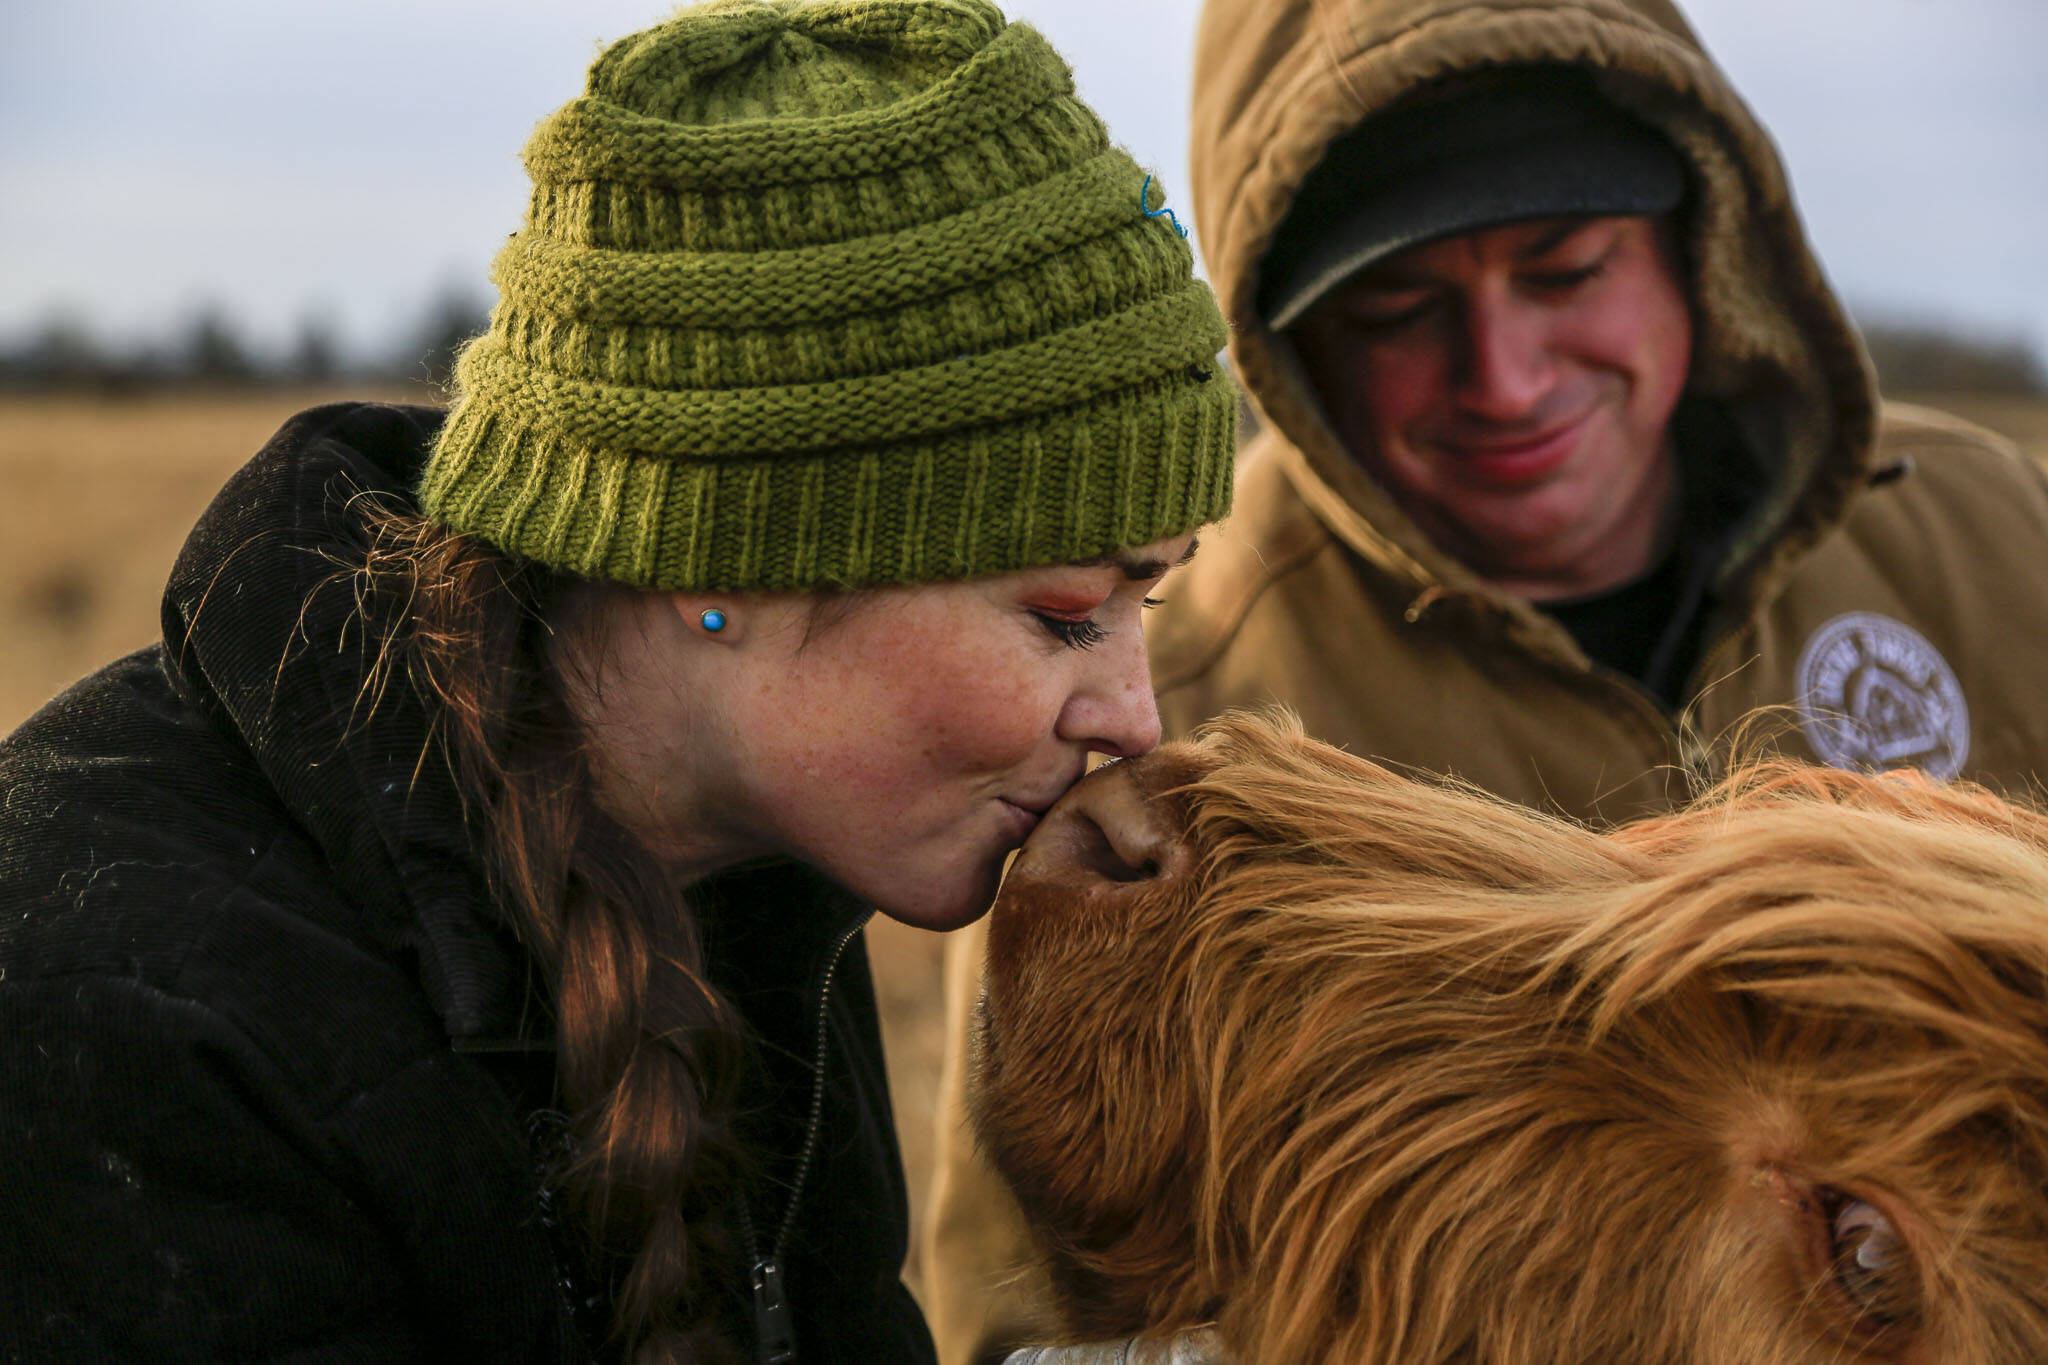 Tara Luckie, 38, left, and her husband Scott Luckie, 37, right, brush cattle at Luckie Farms on Wednesday, in Lake Stevens. The couple keep many of the Highland cattle as pets, but also raise some for others as meat. (Annie Barker / The Herald)